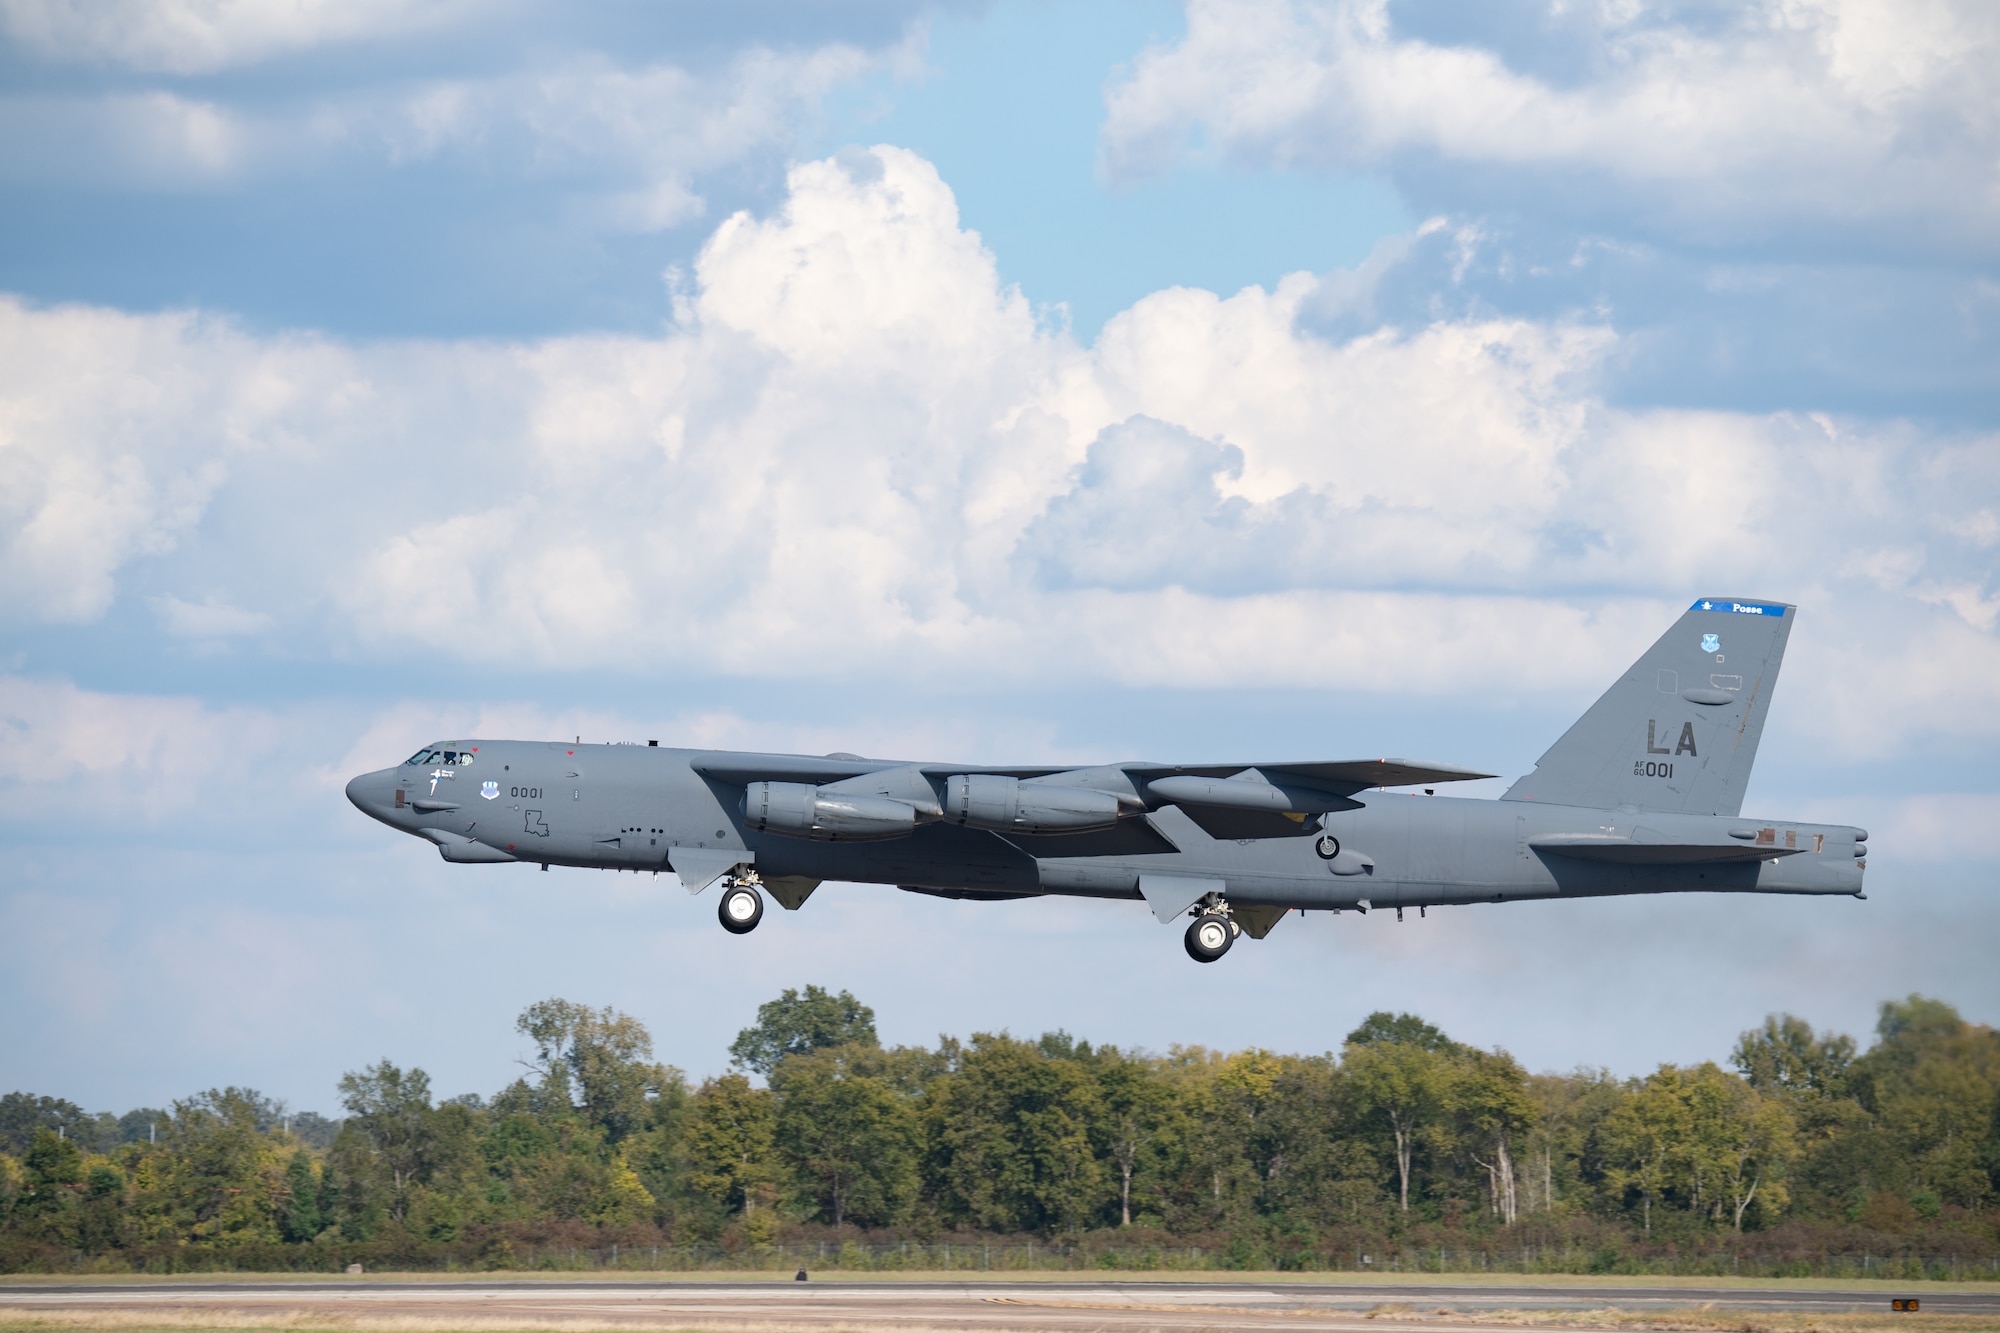 A B-52H Stratofortress takes off from Barksdale Air Force Base, Louisiana, Oct. 21, 2021. Maintenance teams, aircrew, and Airmen across the 2nd Bomb Wing participated in a readiness exercise to showcase nuclear combat capability. (U.S. Air Force photo by Staff Sgt. Christopher Tam)